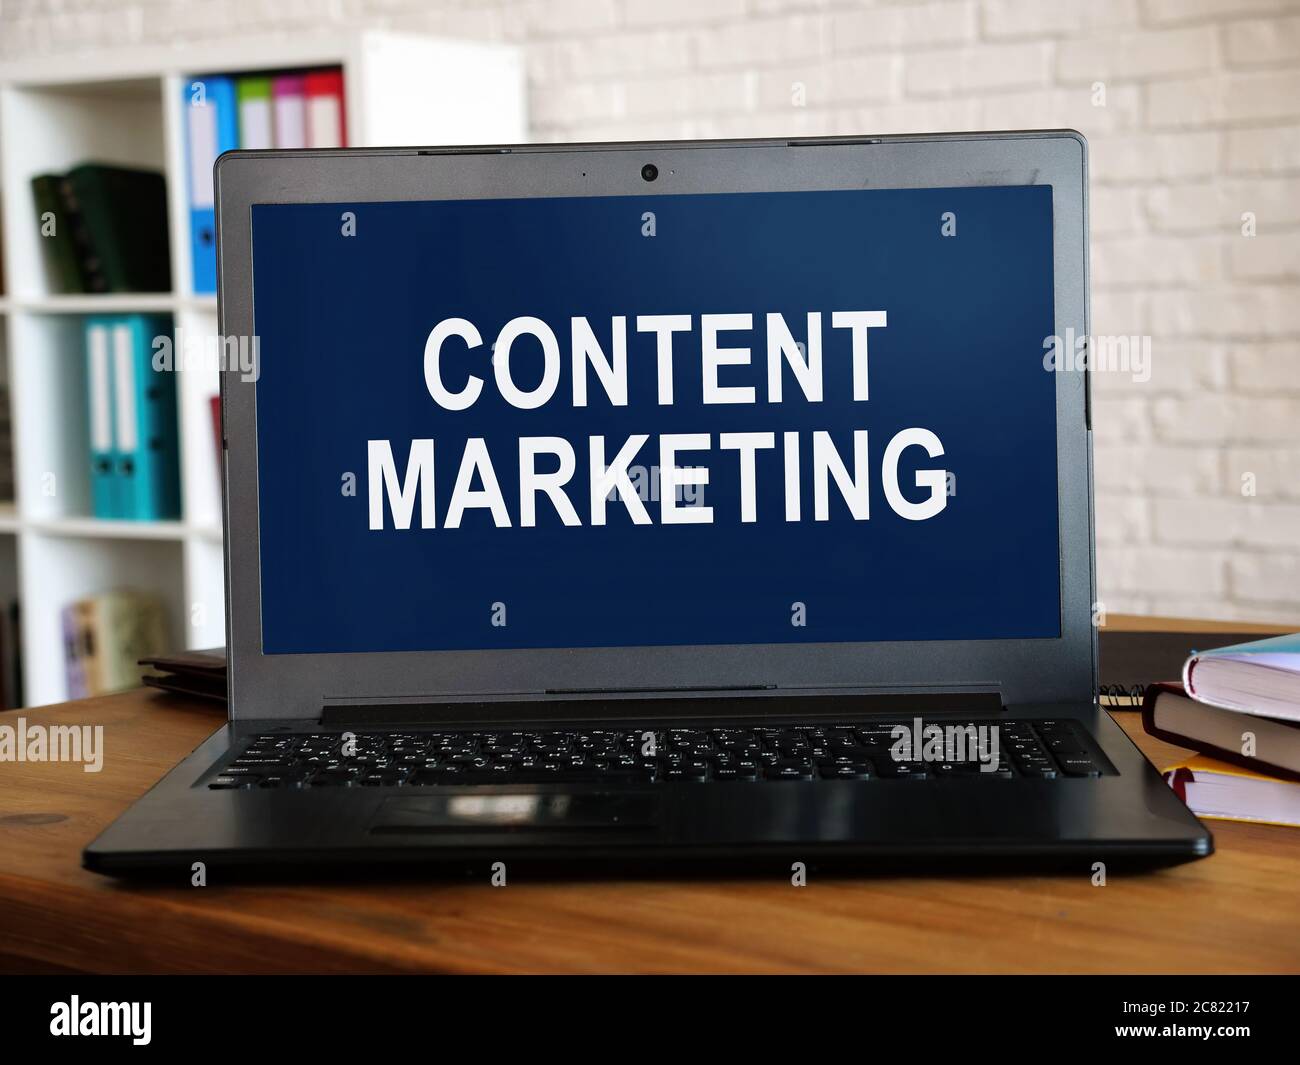 Information about content marketing in the laptop. Stock Photo